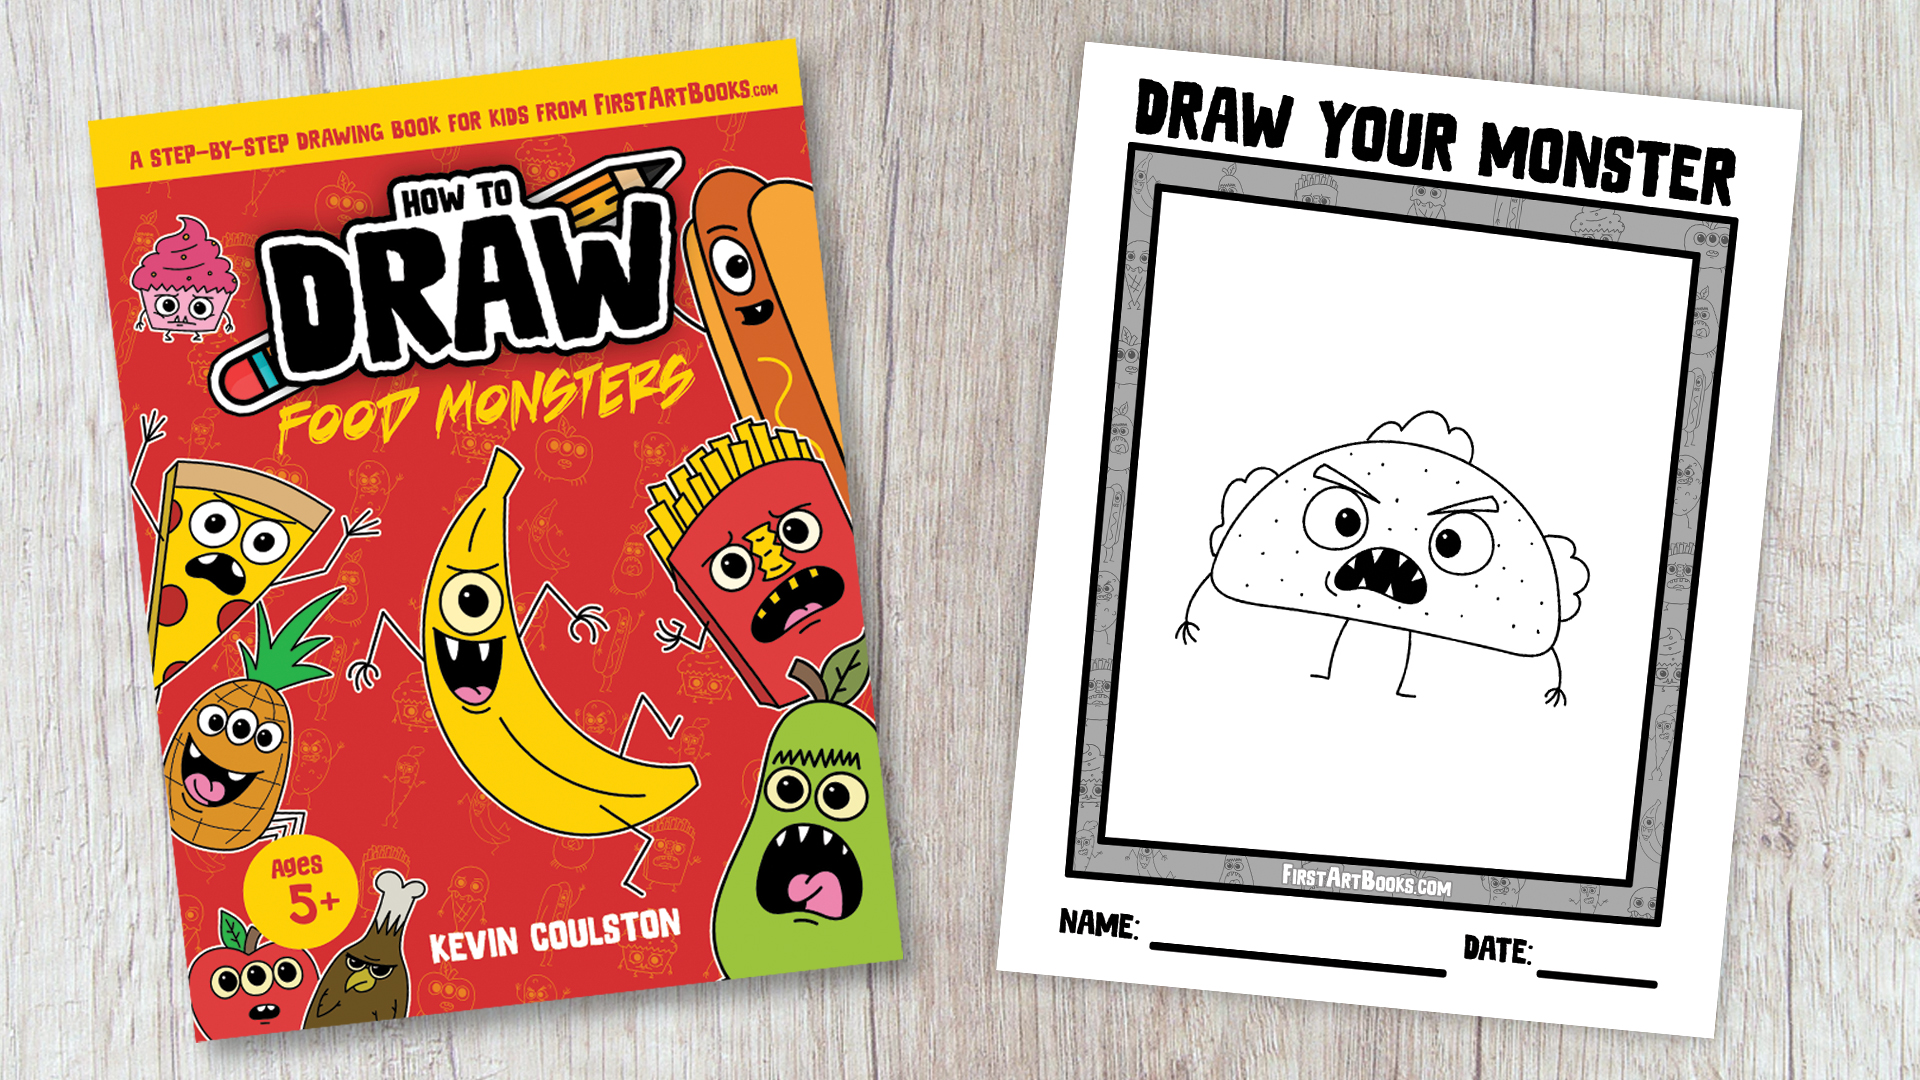 How to Draw: Food Monsters Book Cover and Drawing Page